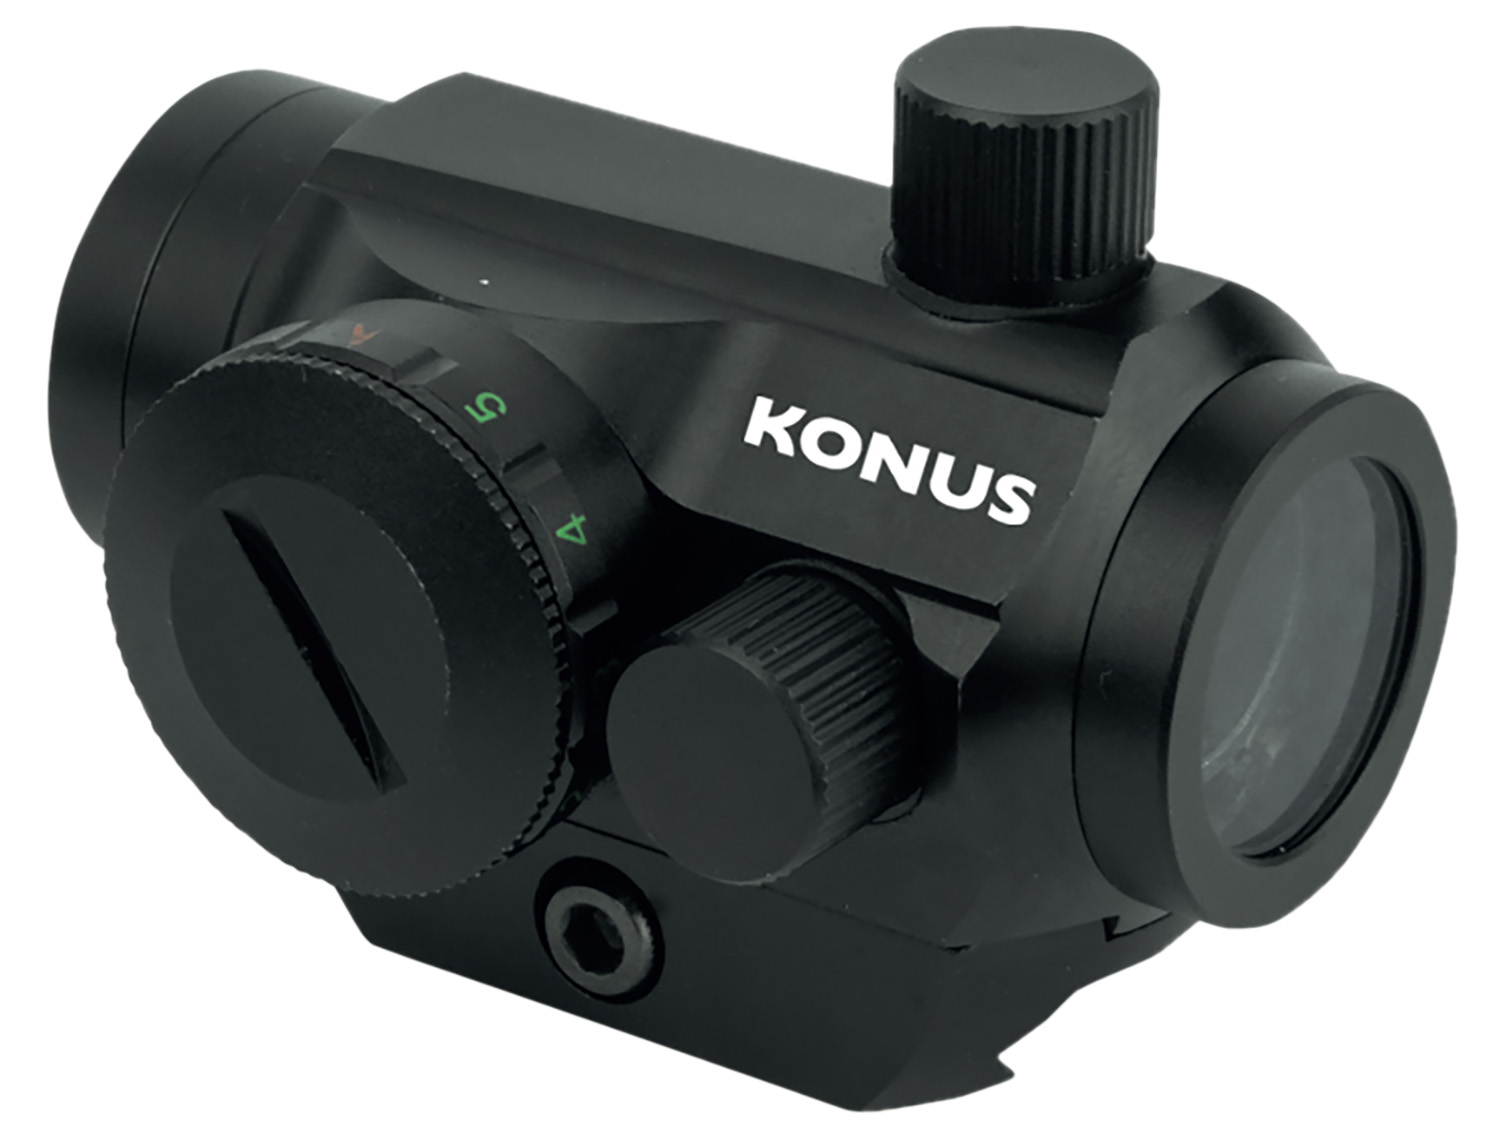 Konus 7215 Nuclear  Matte Black 1x22mm 3 MOA Dual (Red/Green) Illuminated Dot Reticle Features QR Dual Mounting System